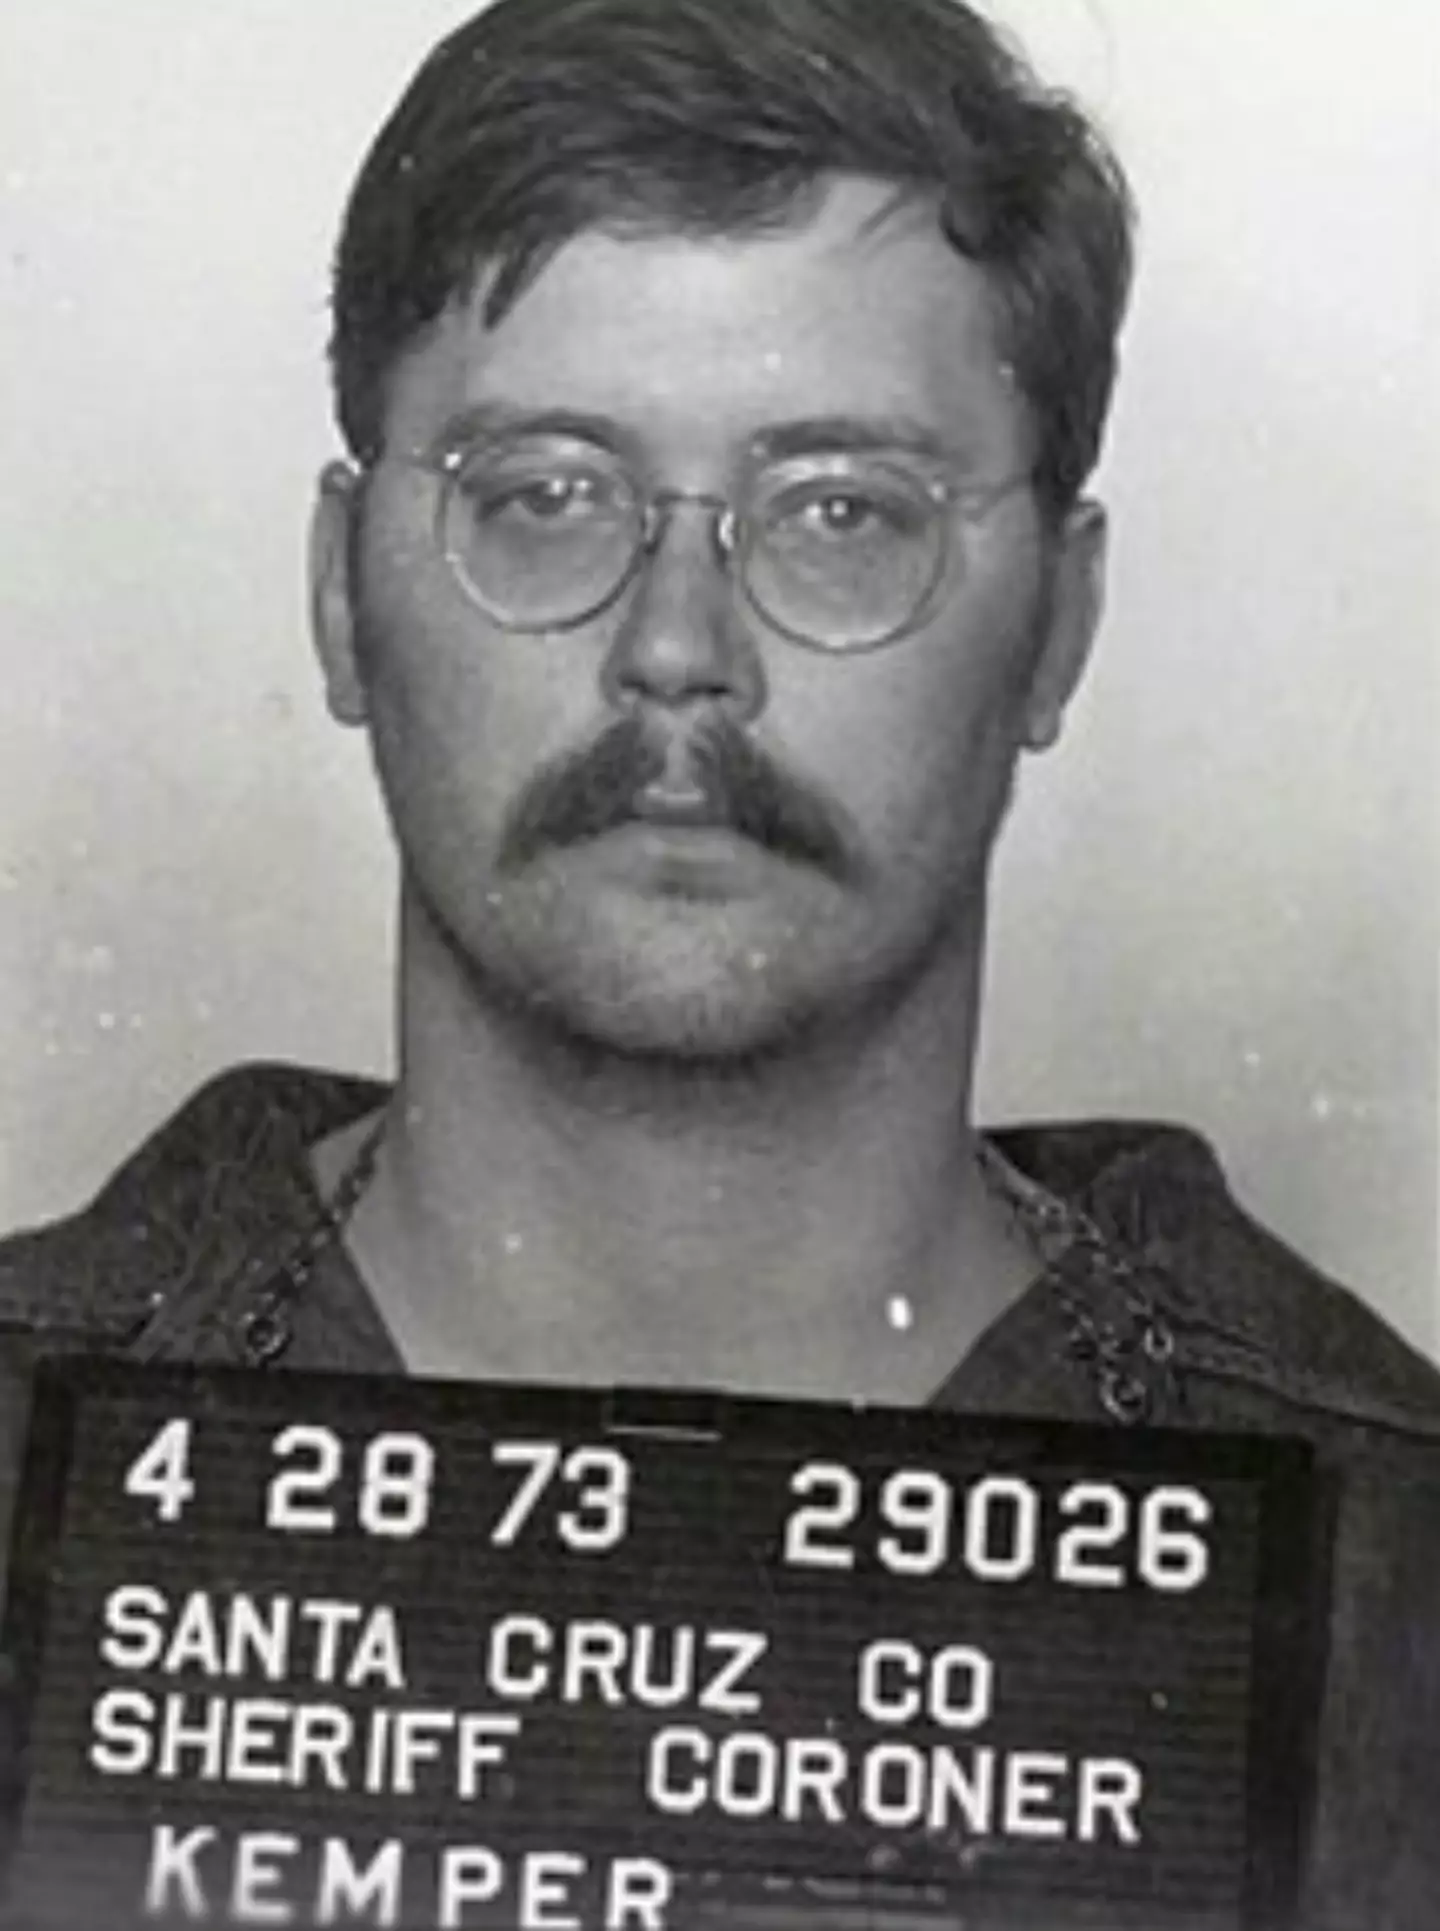 California-born Edmund Kemper is a serial killer who murdered eight people from May 1972 to April 1973, including a 15-year-old girl, his own mother, her best friend.